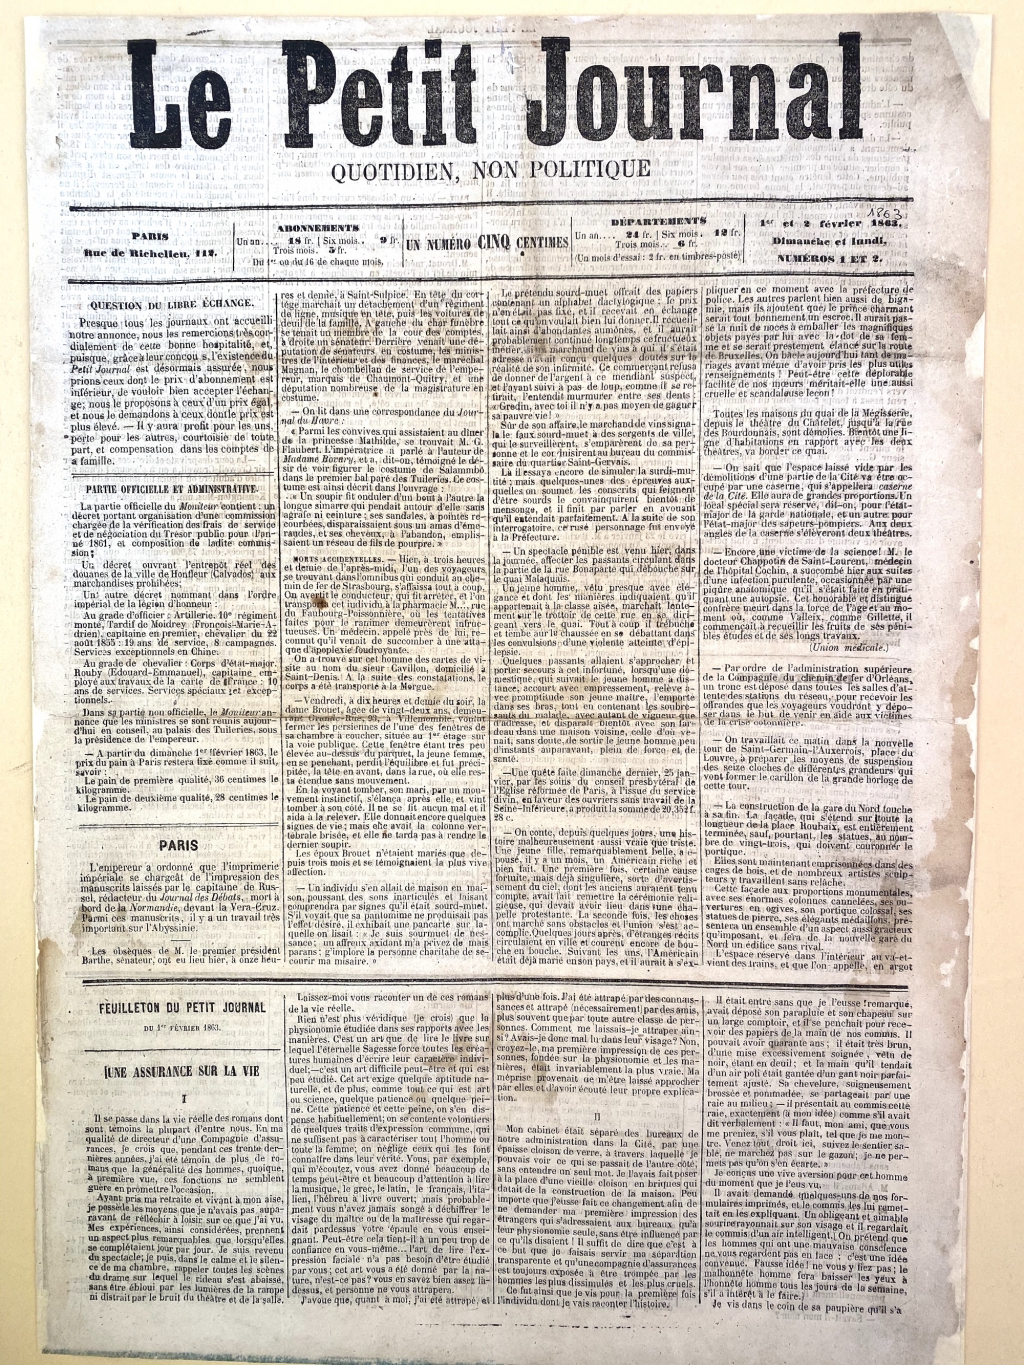 First issue of Le Petit Journal